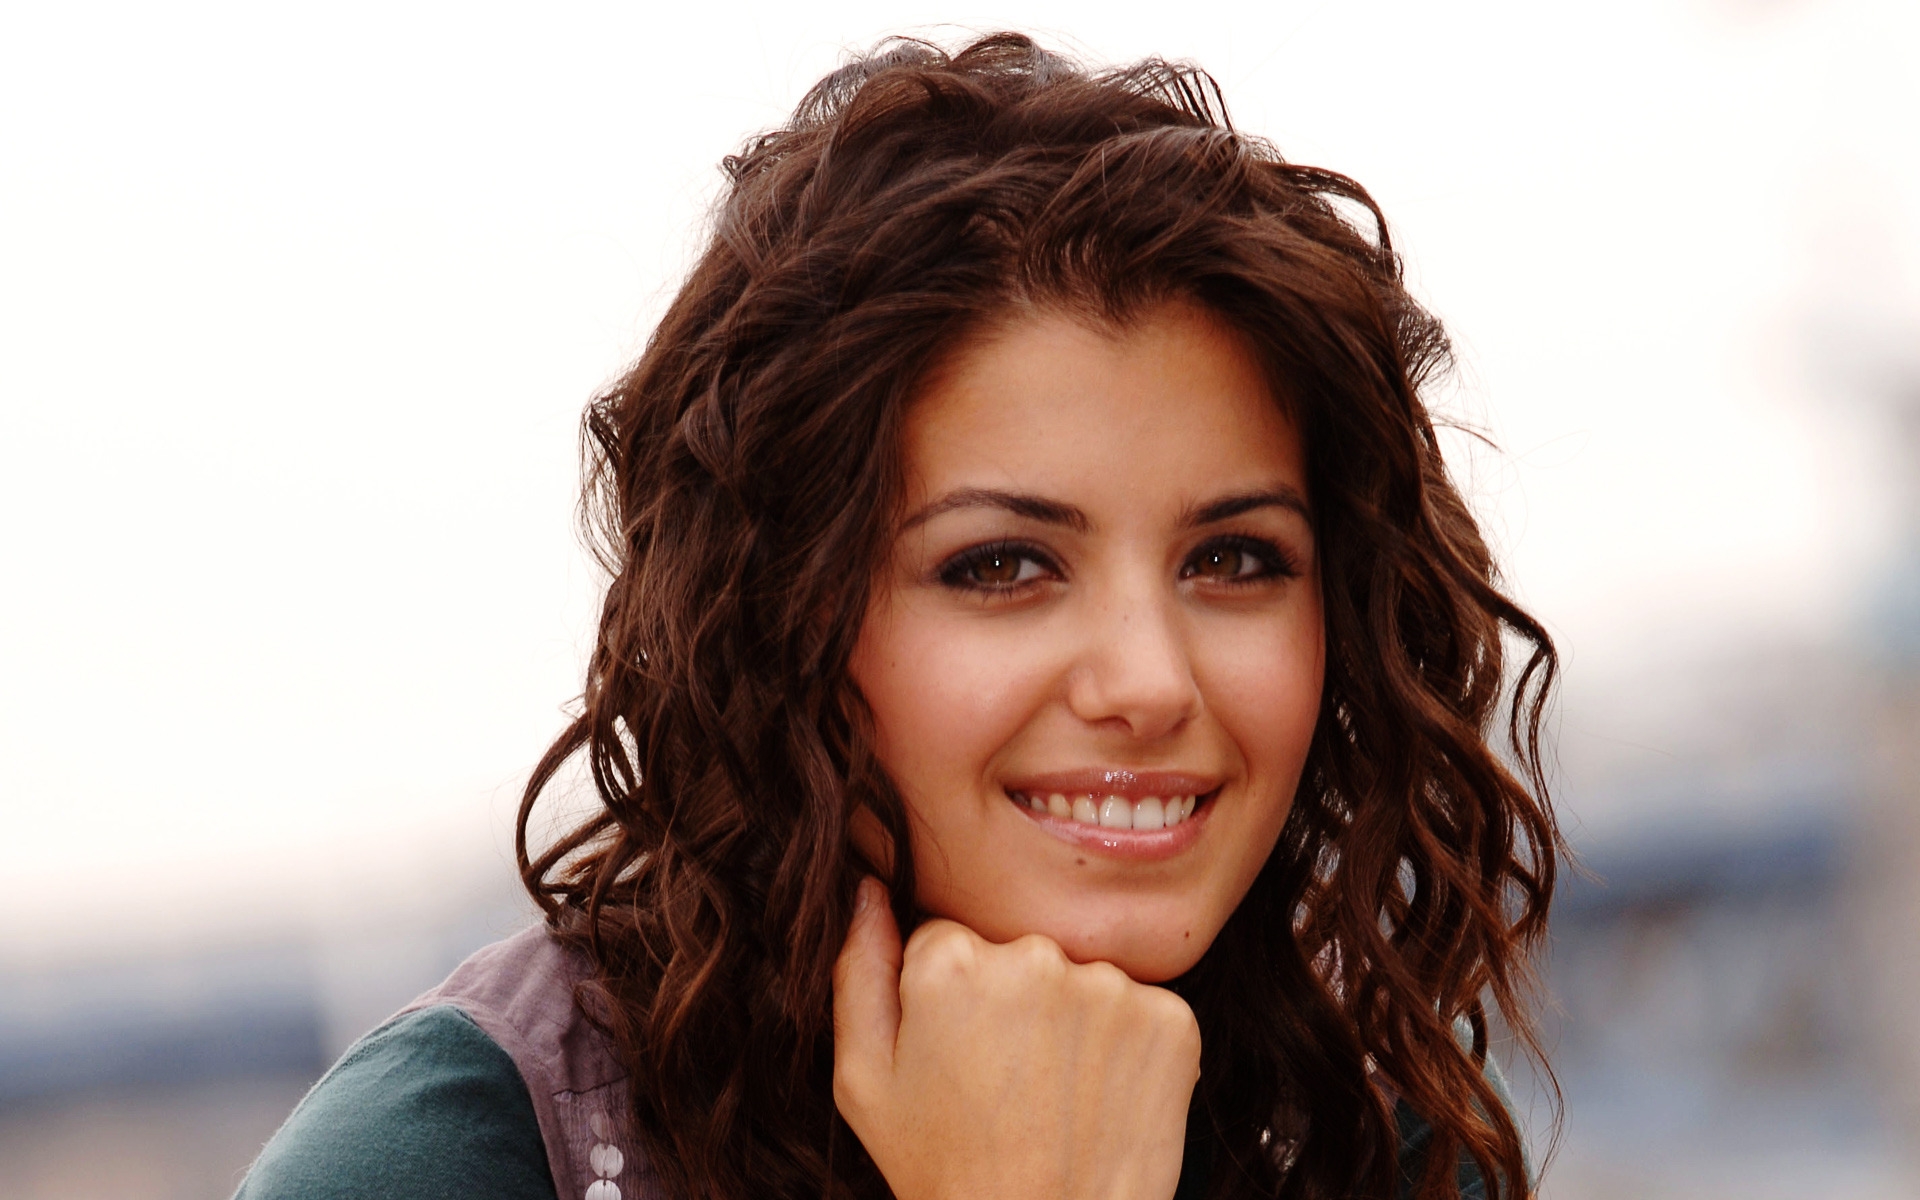 Katie Melua Smile for 1920 x 1200 widescreen resolution